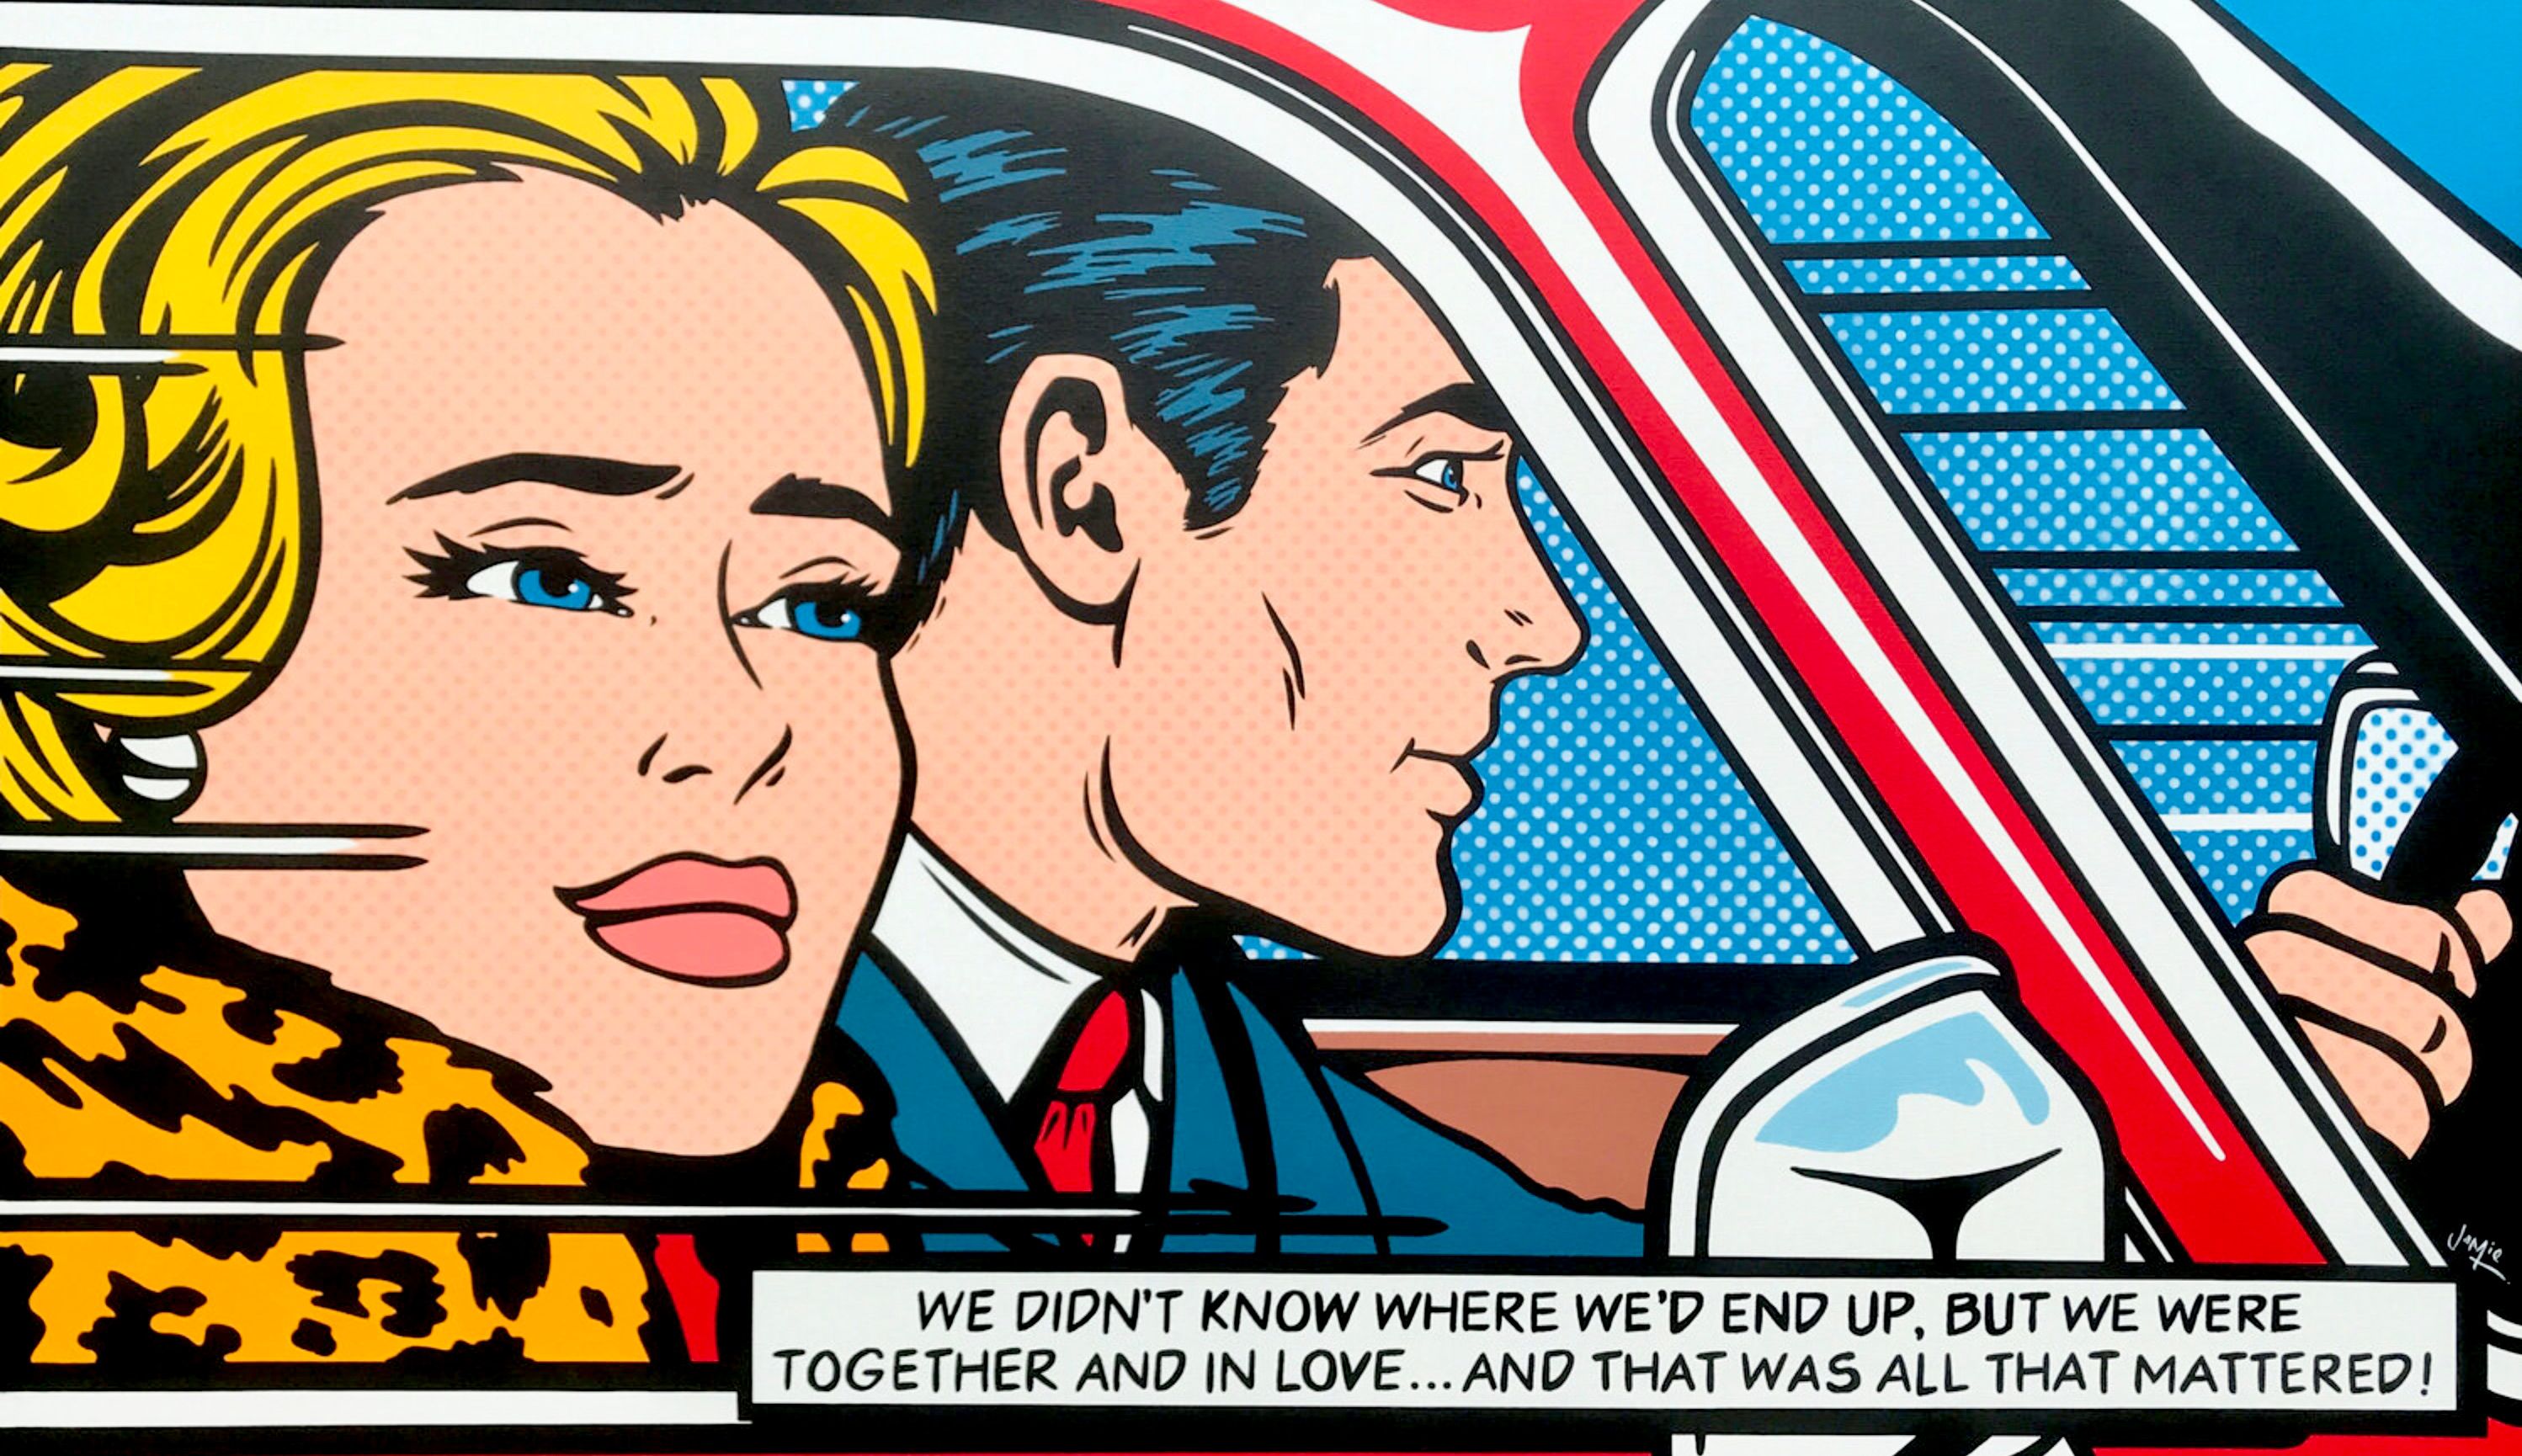 Jamie Lee's "The Adventure" pop art painting in comic style with original design of a young couple. Imagine the next scene after Lichtenstein's painting "In the Car". Original pop art painting in comic style of a young couple in love going on a road trip.